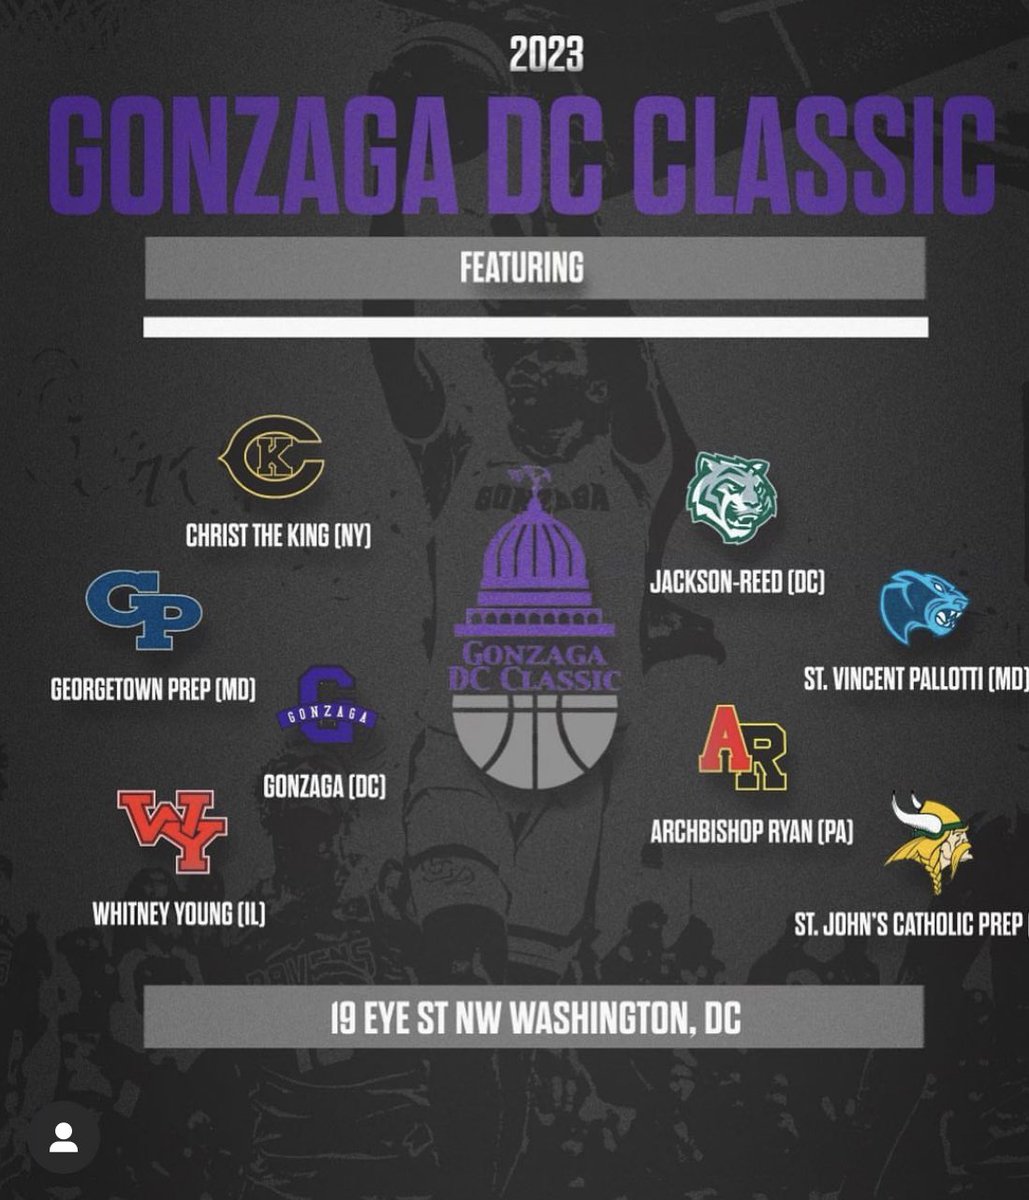 Thank you @GonzagaHoops @GonzagaClassic for the invite to one of top tournaments in the country! We are looking forward to it. Dec 8-10th.